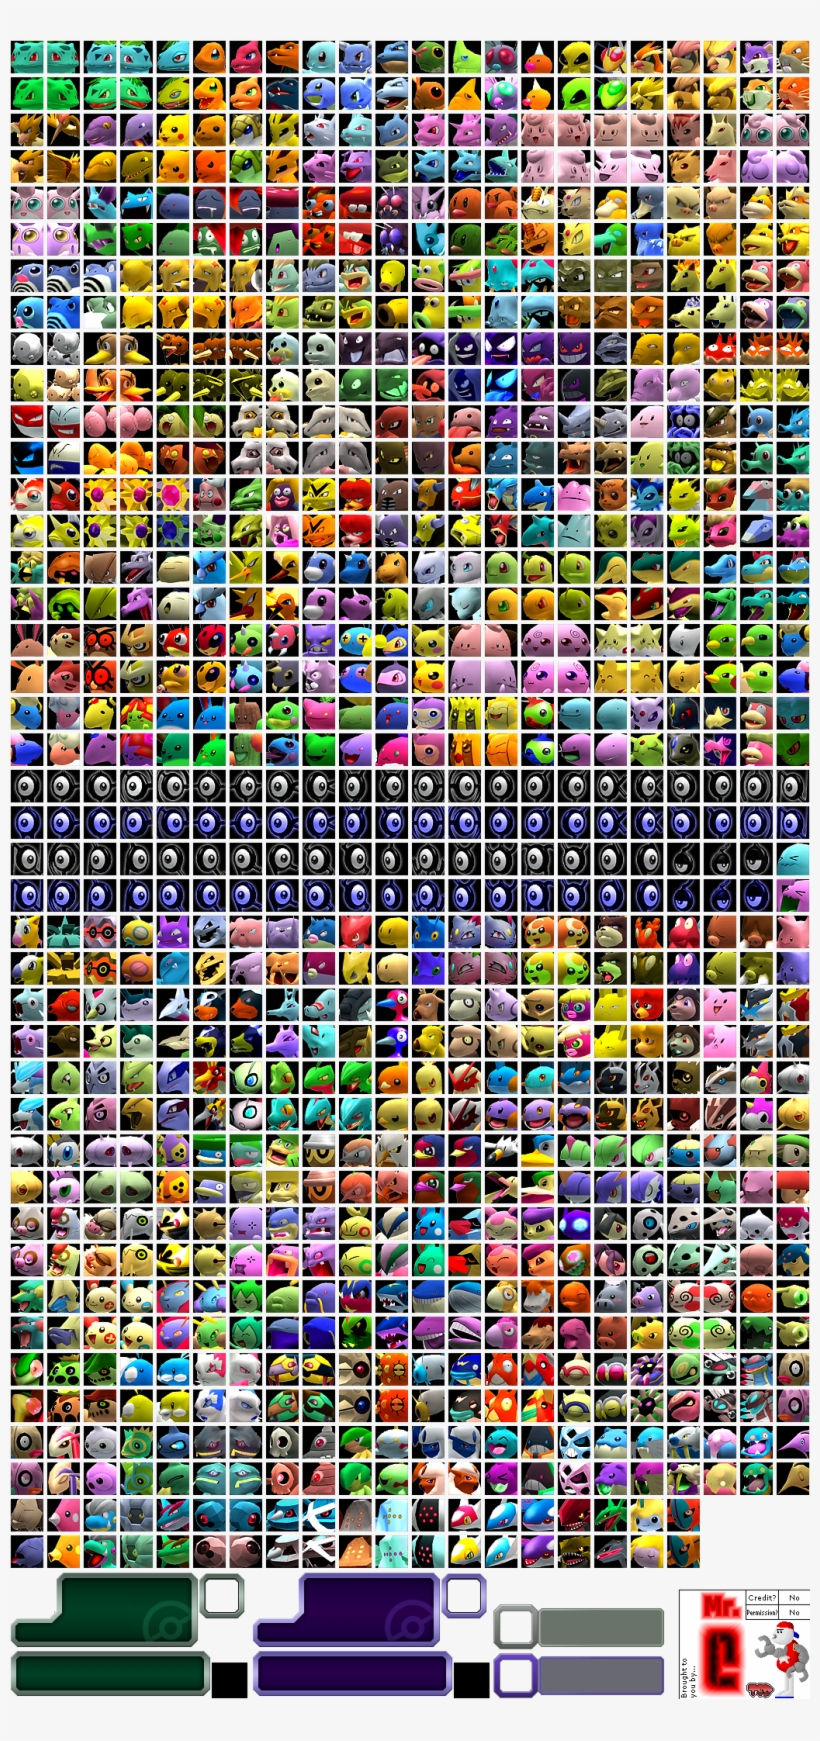 Click For Full Sized Image Pokémon Icons - Visual Arts, transparent png #2168380